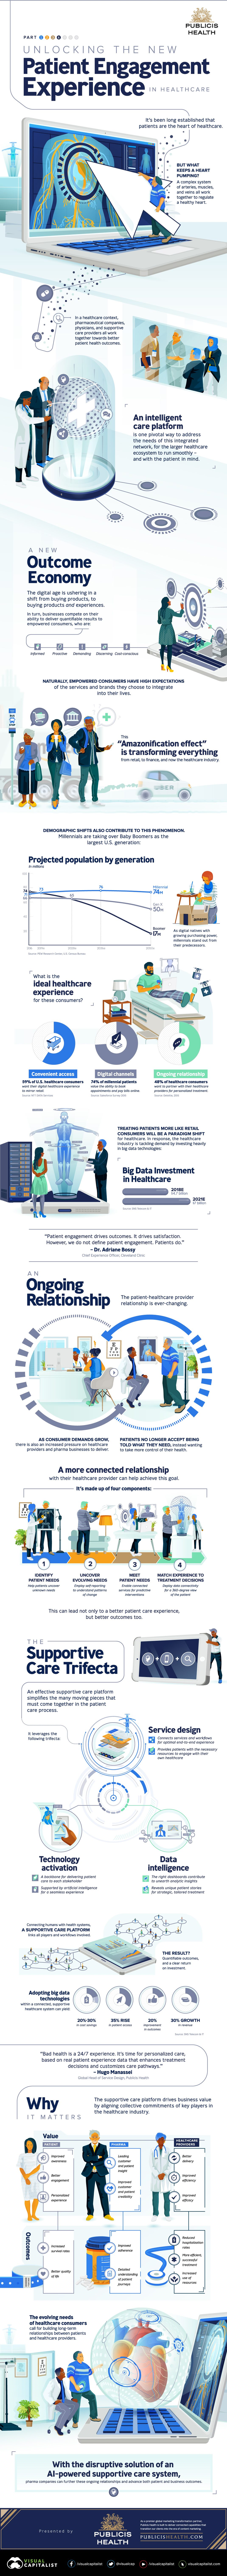 The Amazonification of Healthcare #infographic